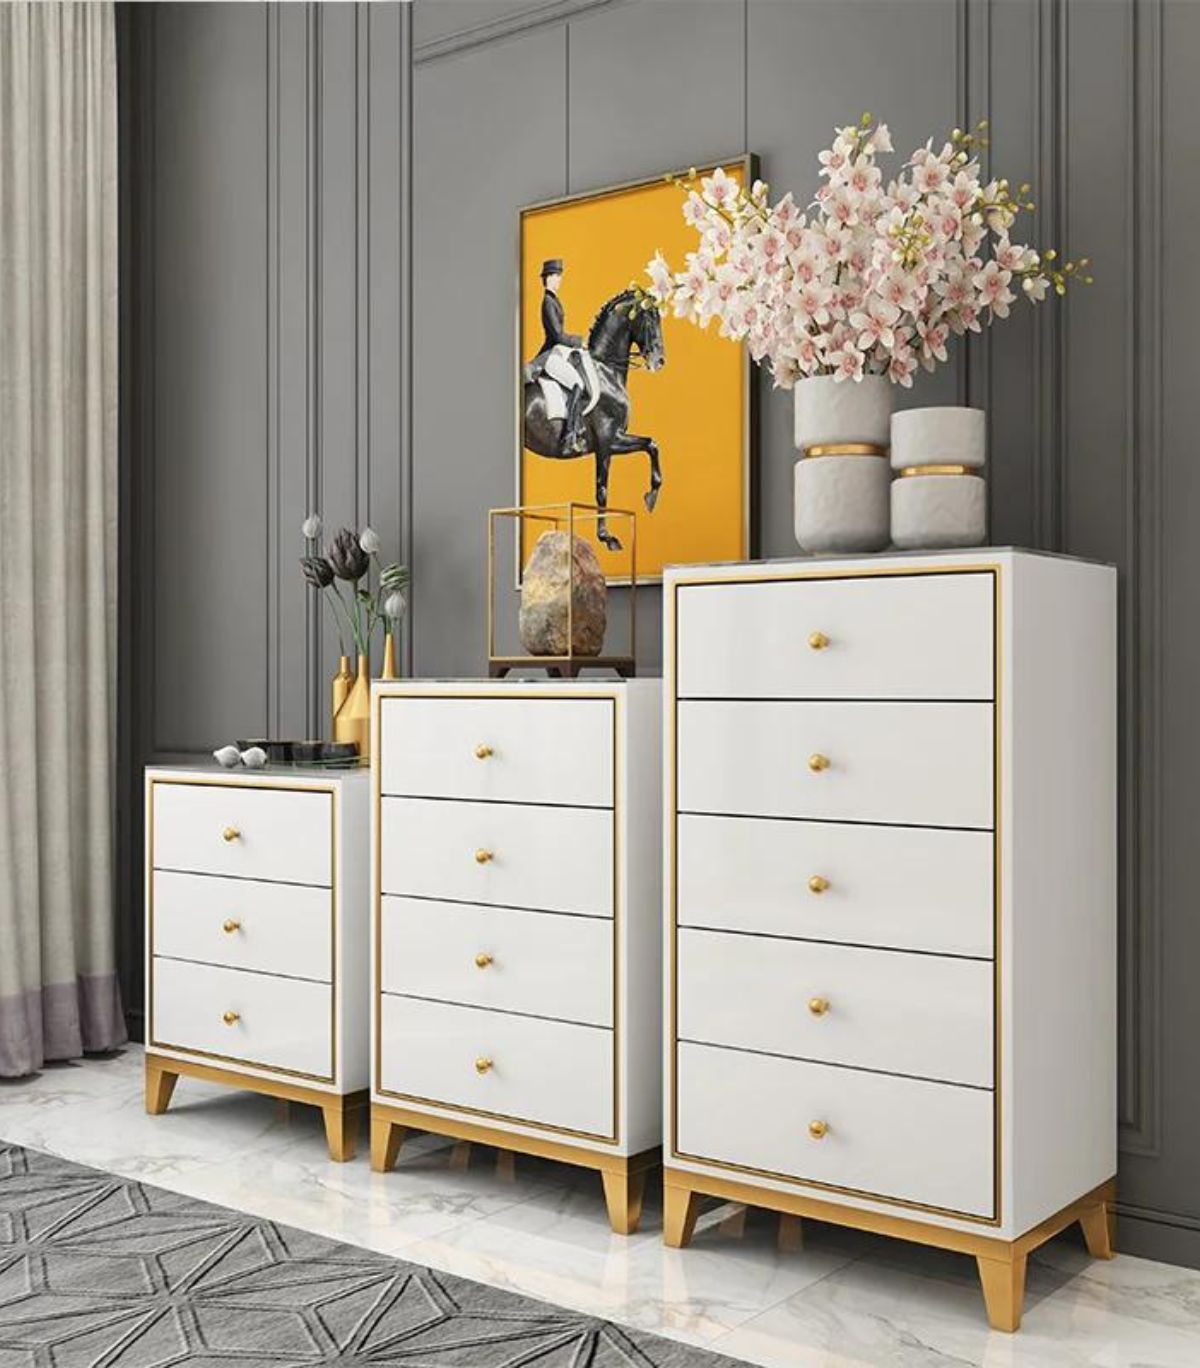 5 + 4 + 3 Chest Of Drawers